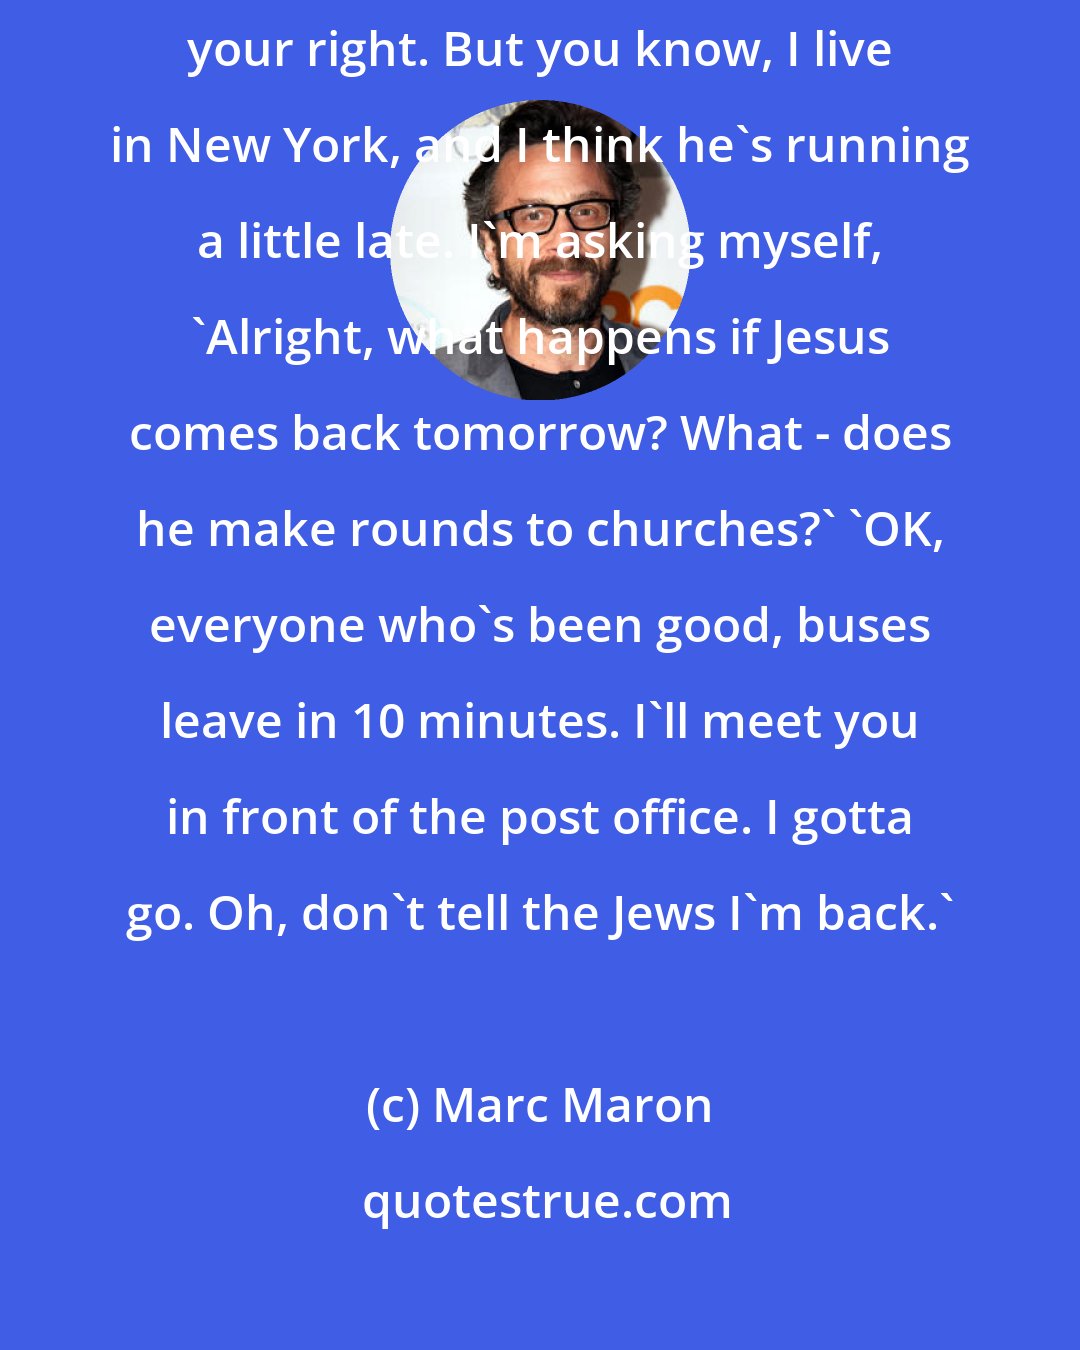 Marc Maron: A lot of people think that Jesus is coming back. That's fine, it's your right. But you know, I live in New York, and I think he's running a little late. I'm asking myself, 'Alright, what happens if Jesus comes back tomorrow? What - does he make rounds to churches?' 'OK, everyone who's been good, buses leave in 10 minutes. I'll meet you in front of the post office. I gotta go. Oh, don't tell the Jews I'm back.'